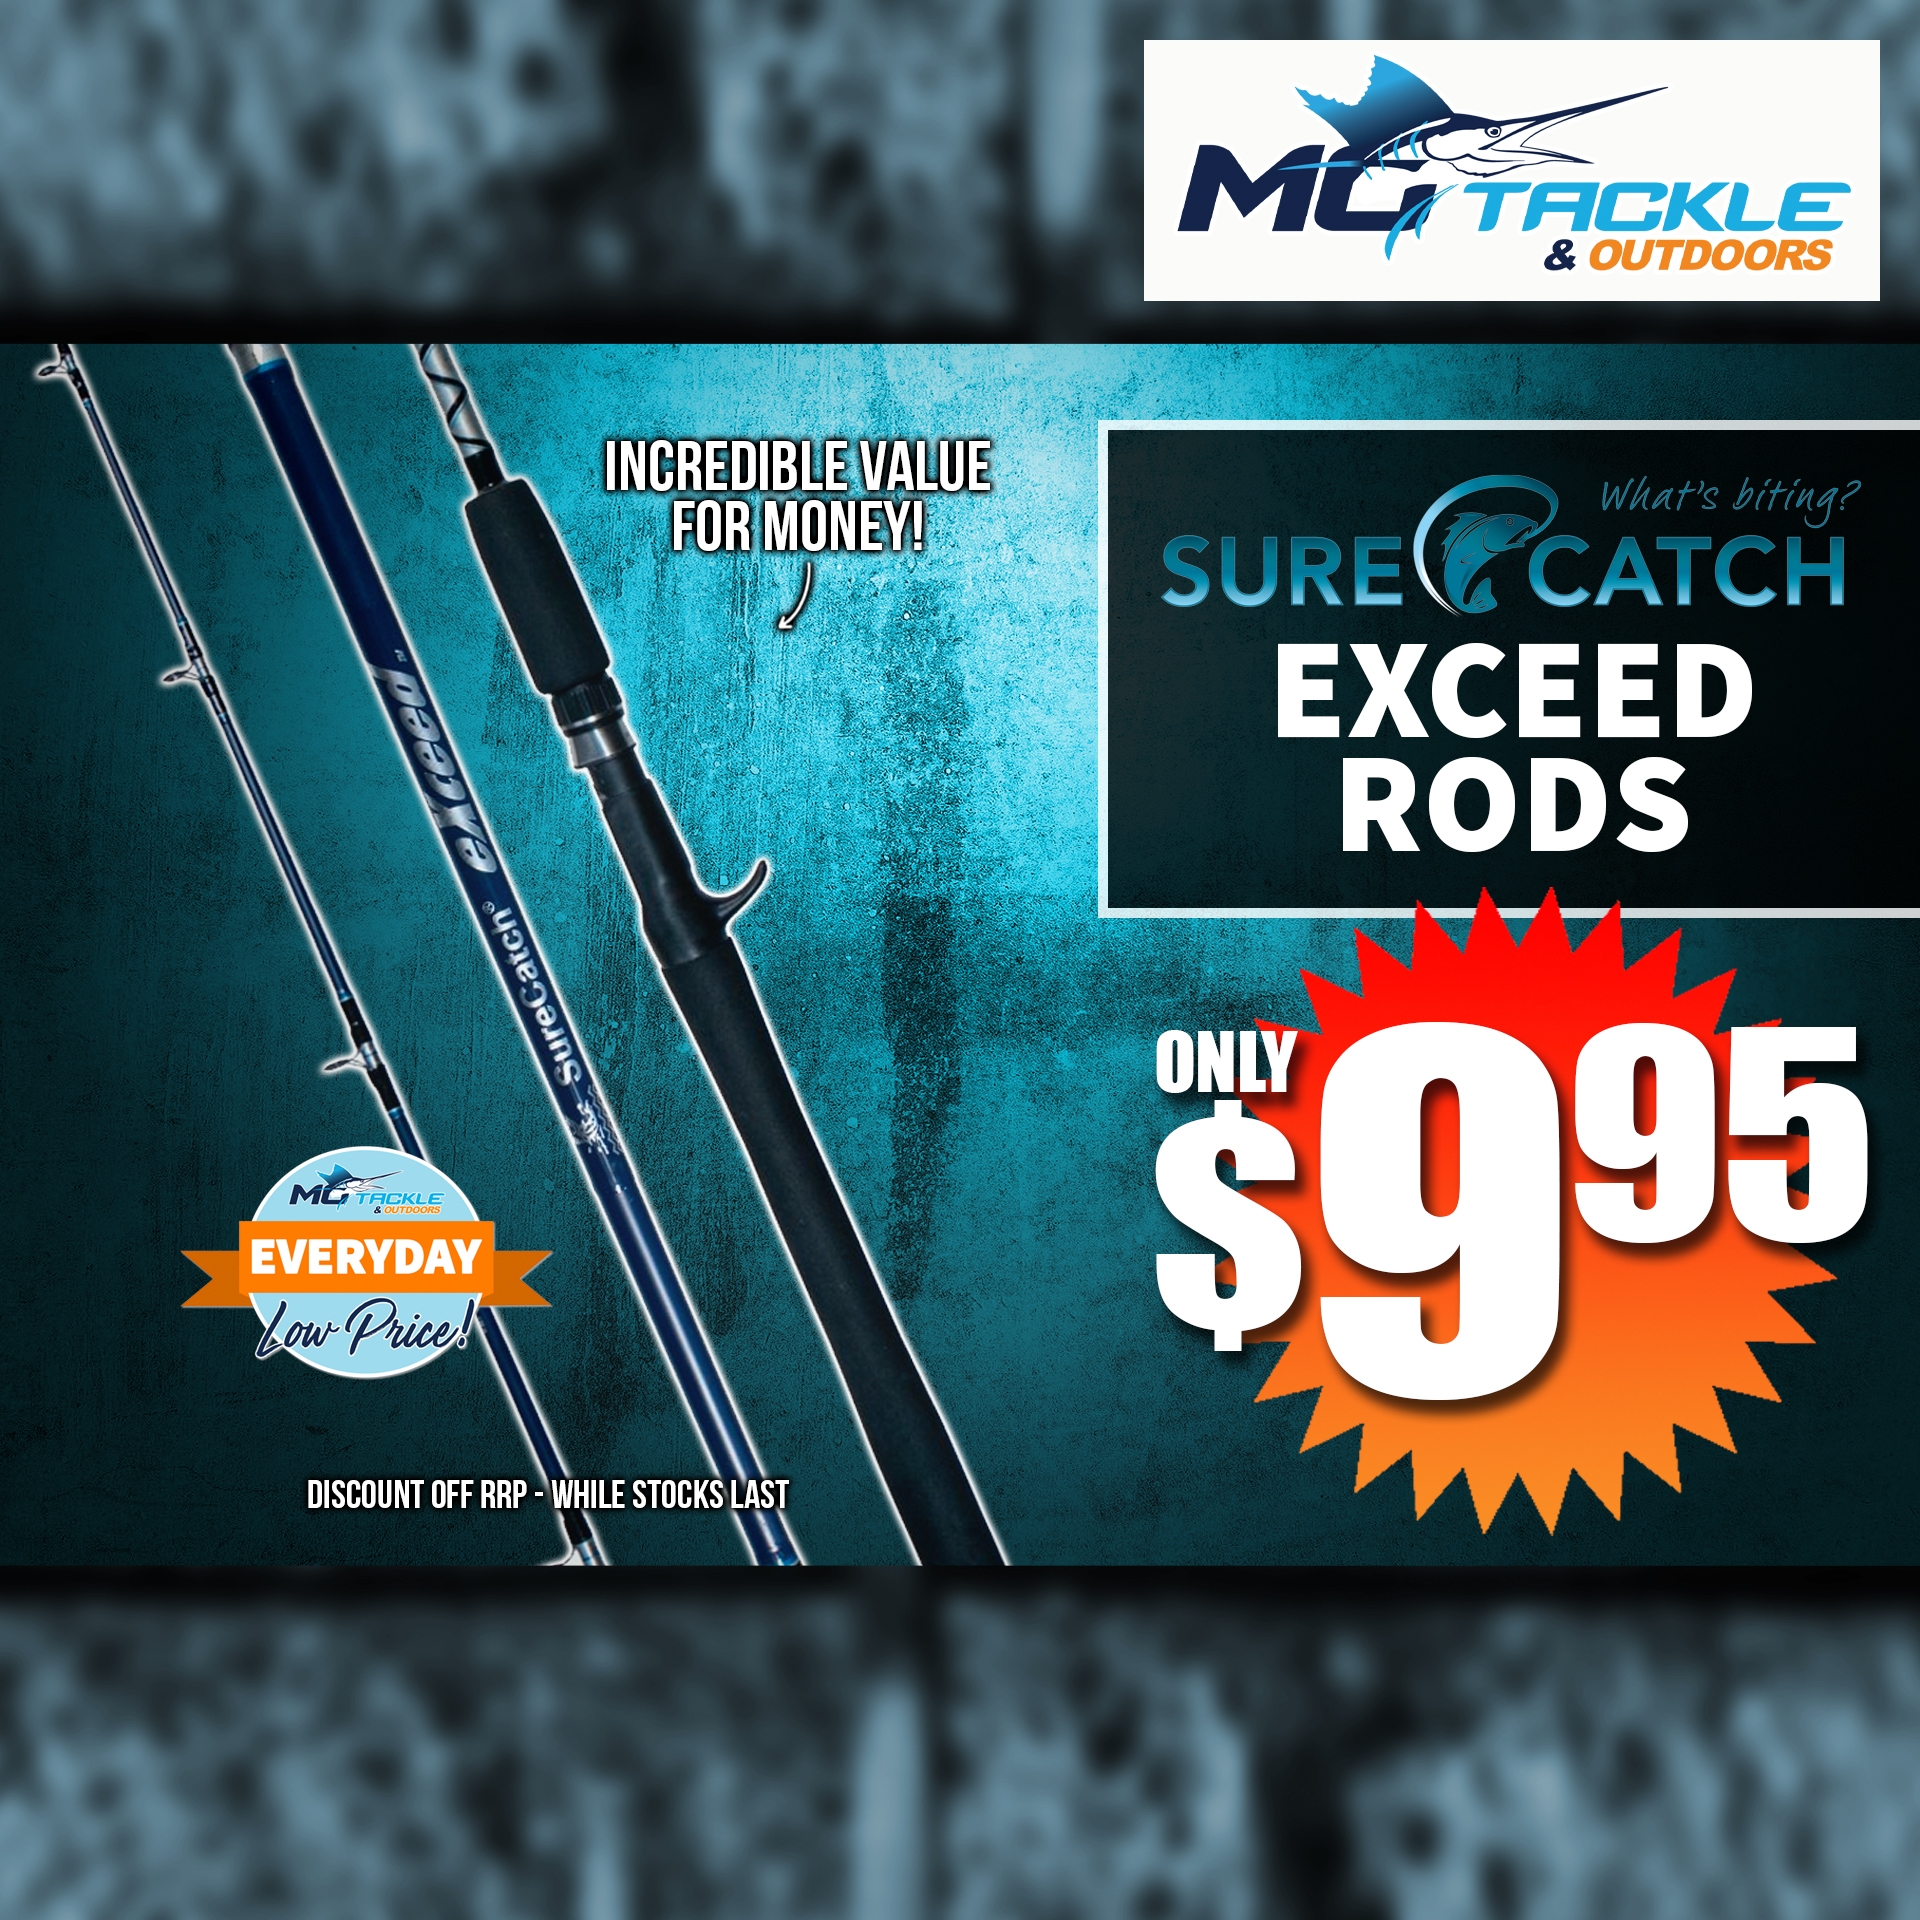 SURECATCH EXCEED ROD only $9.95